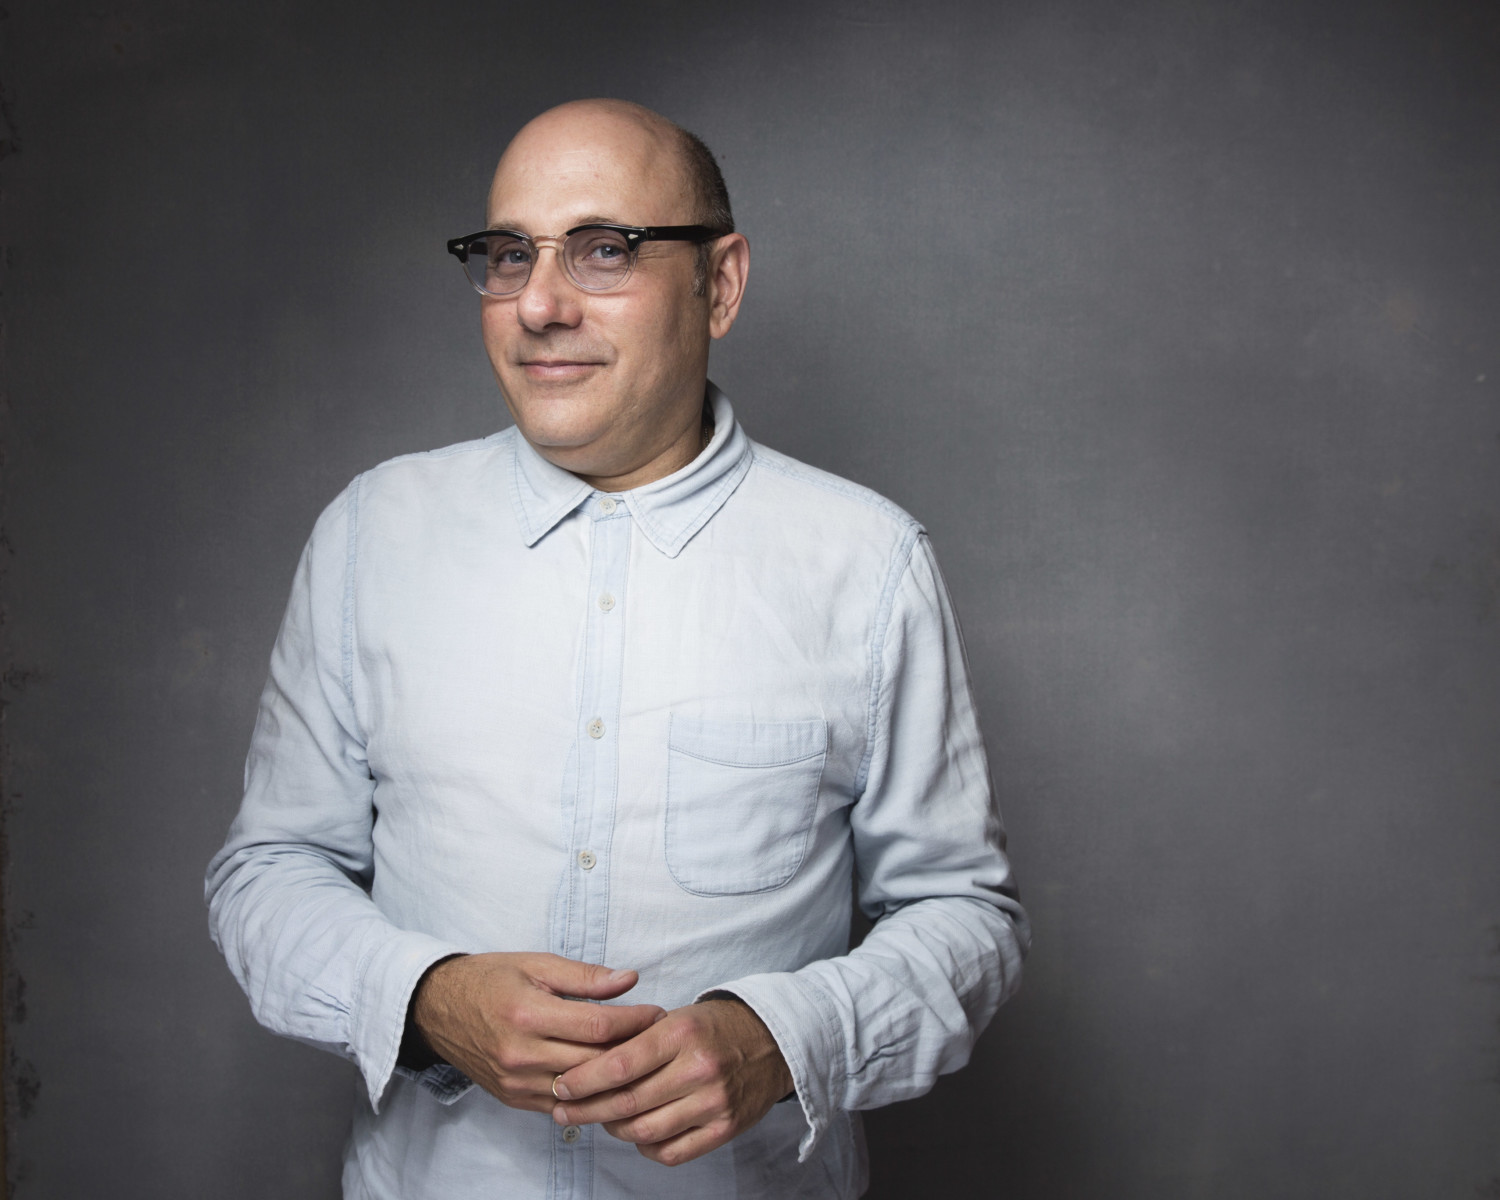 Actor Willie Garson poses for portrait in 2017.